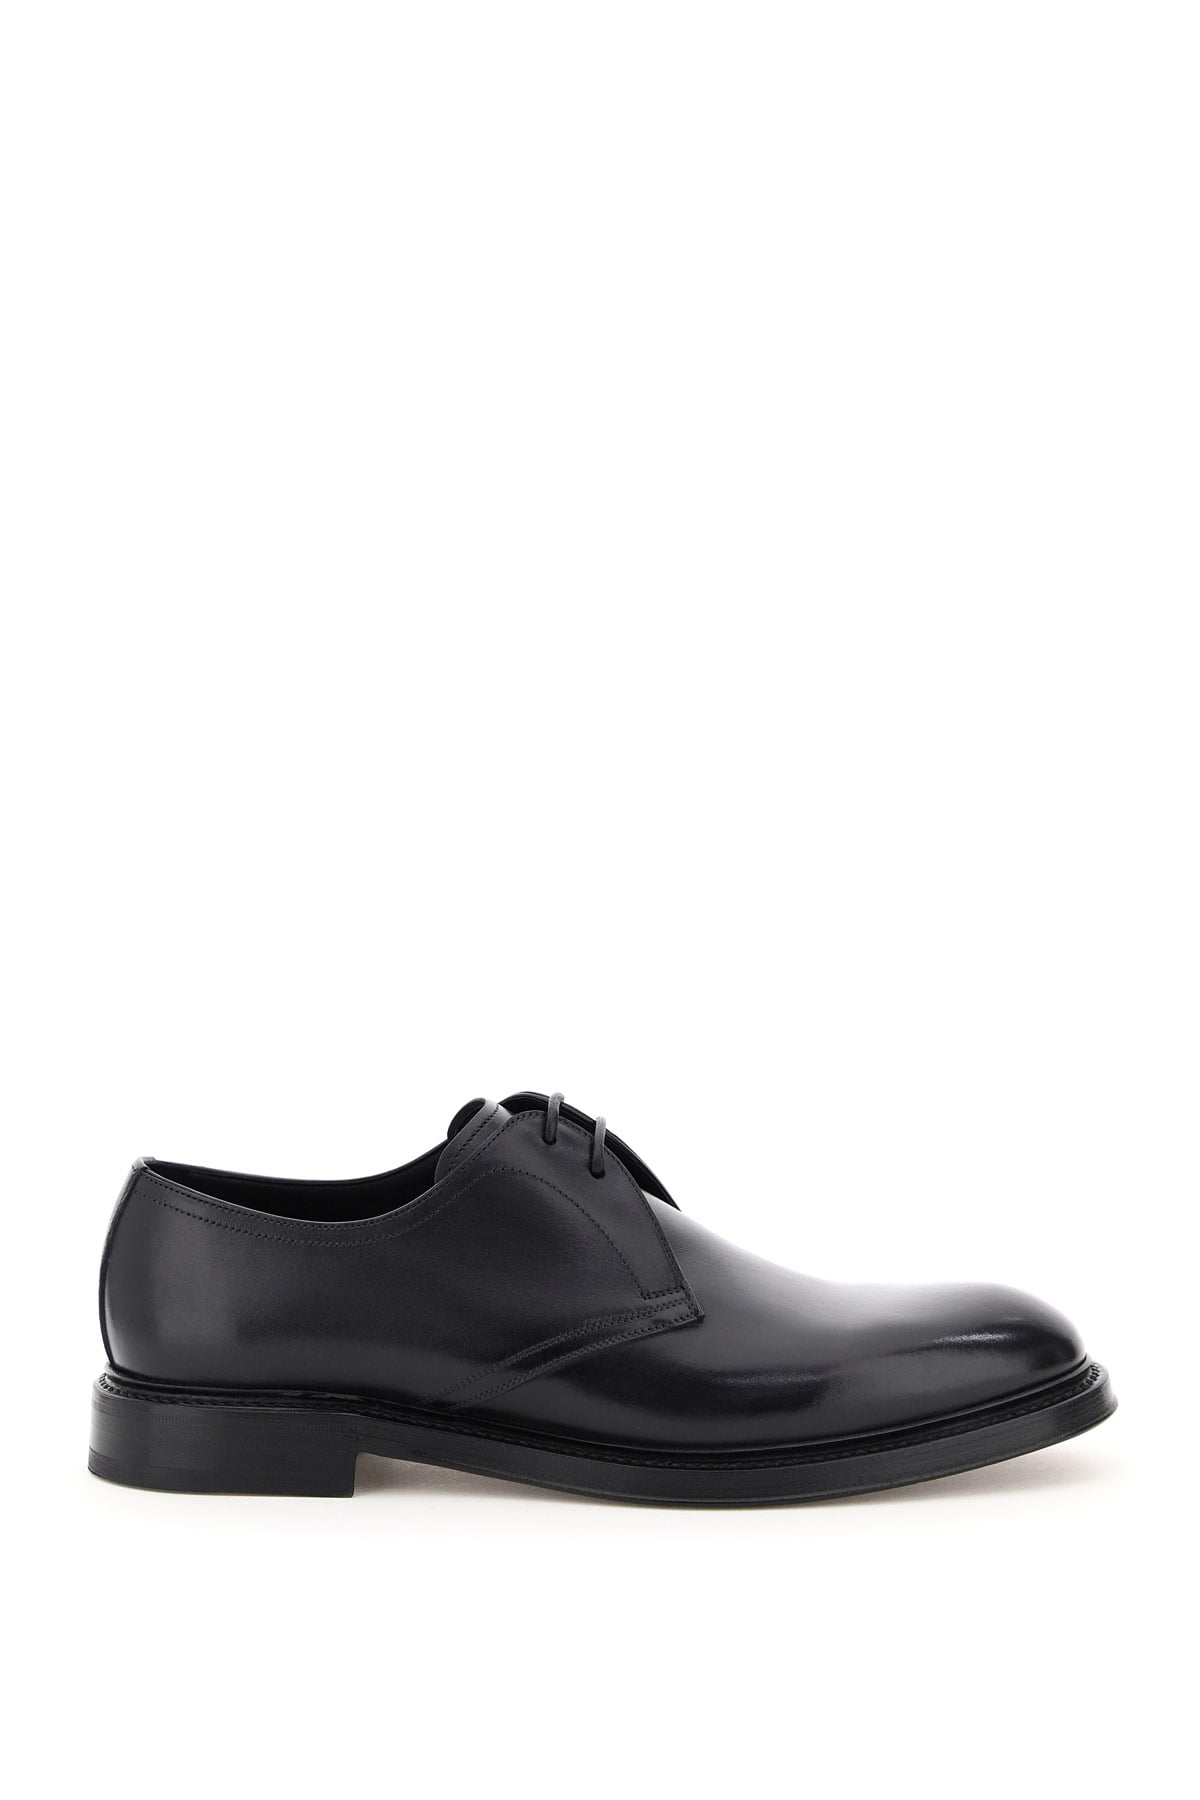 Dolce & gabbana giotto leather lace-up shoes - Walmart.com